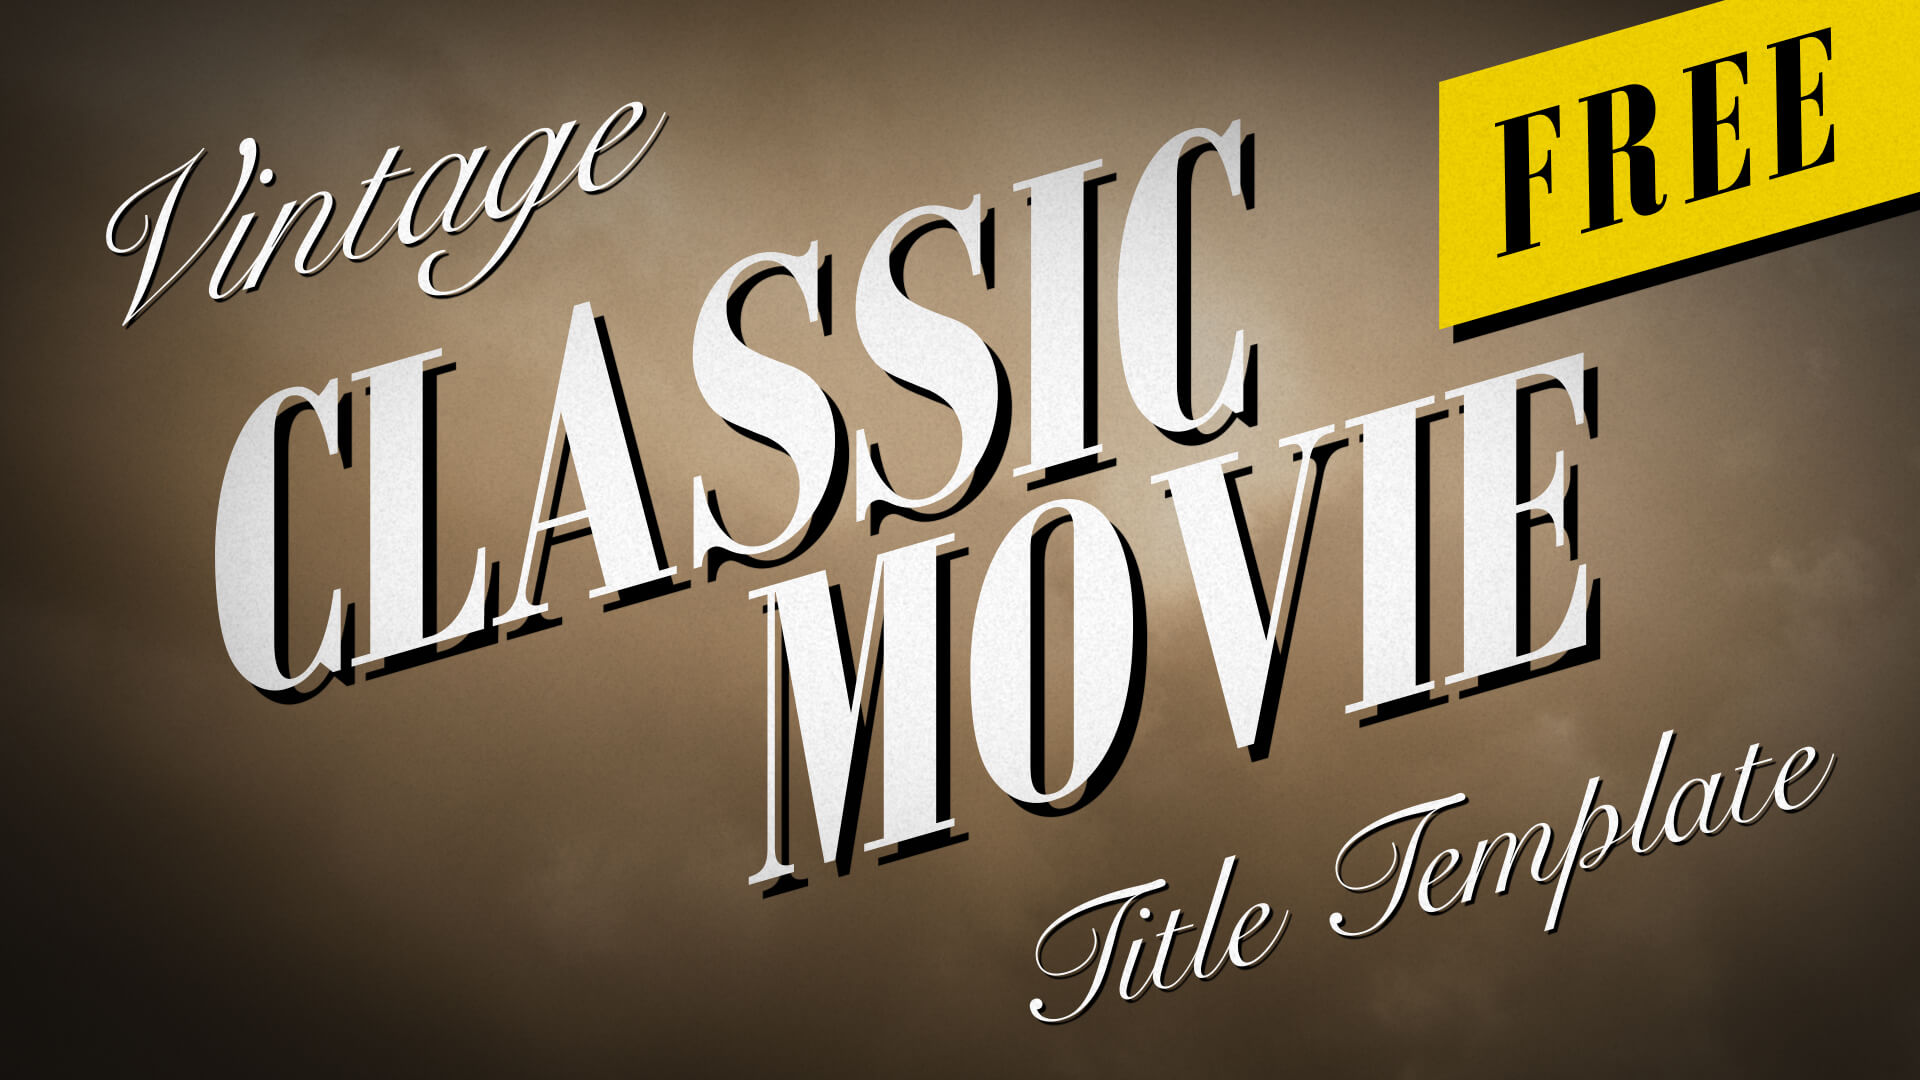 Vintage Classic Movie Titles - Motion Graphics Template - Enchanted Media